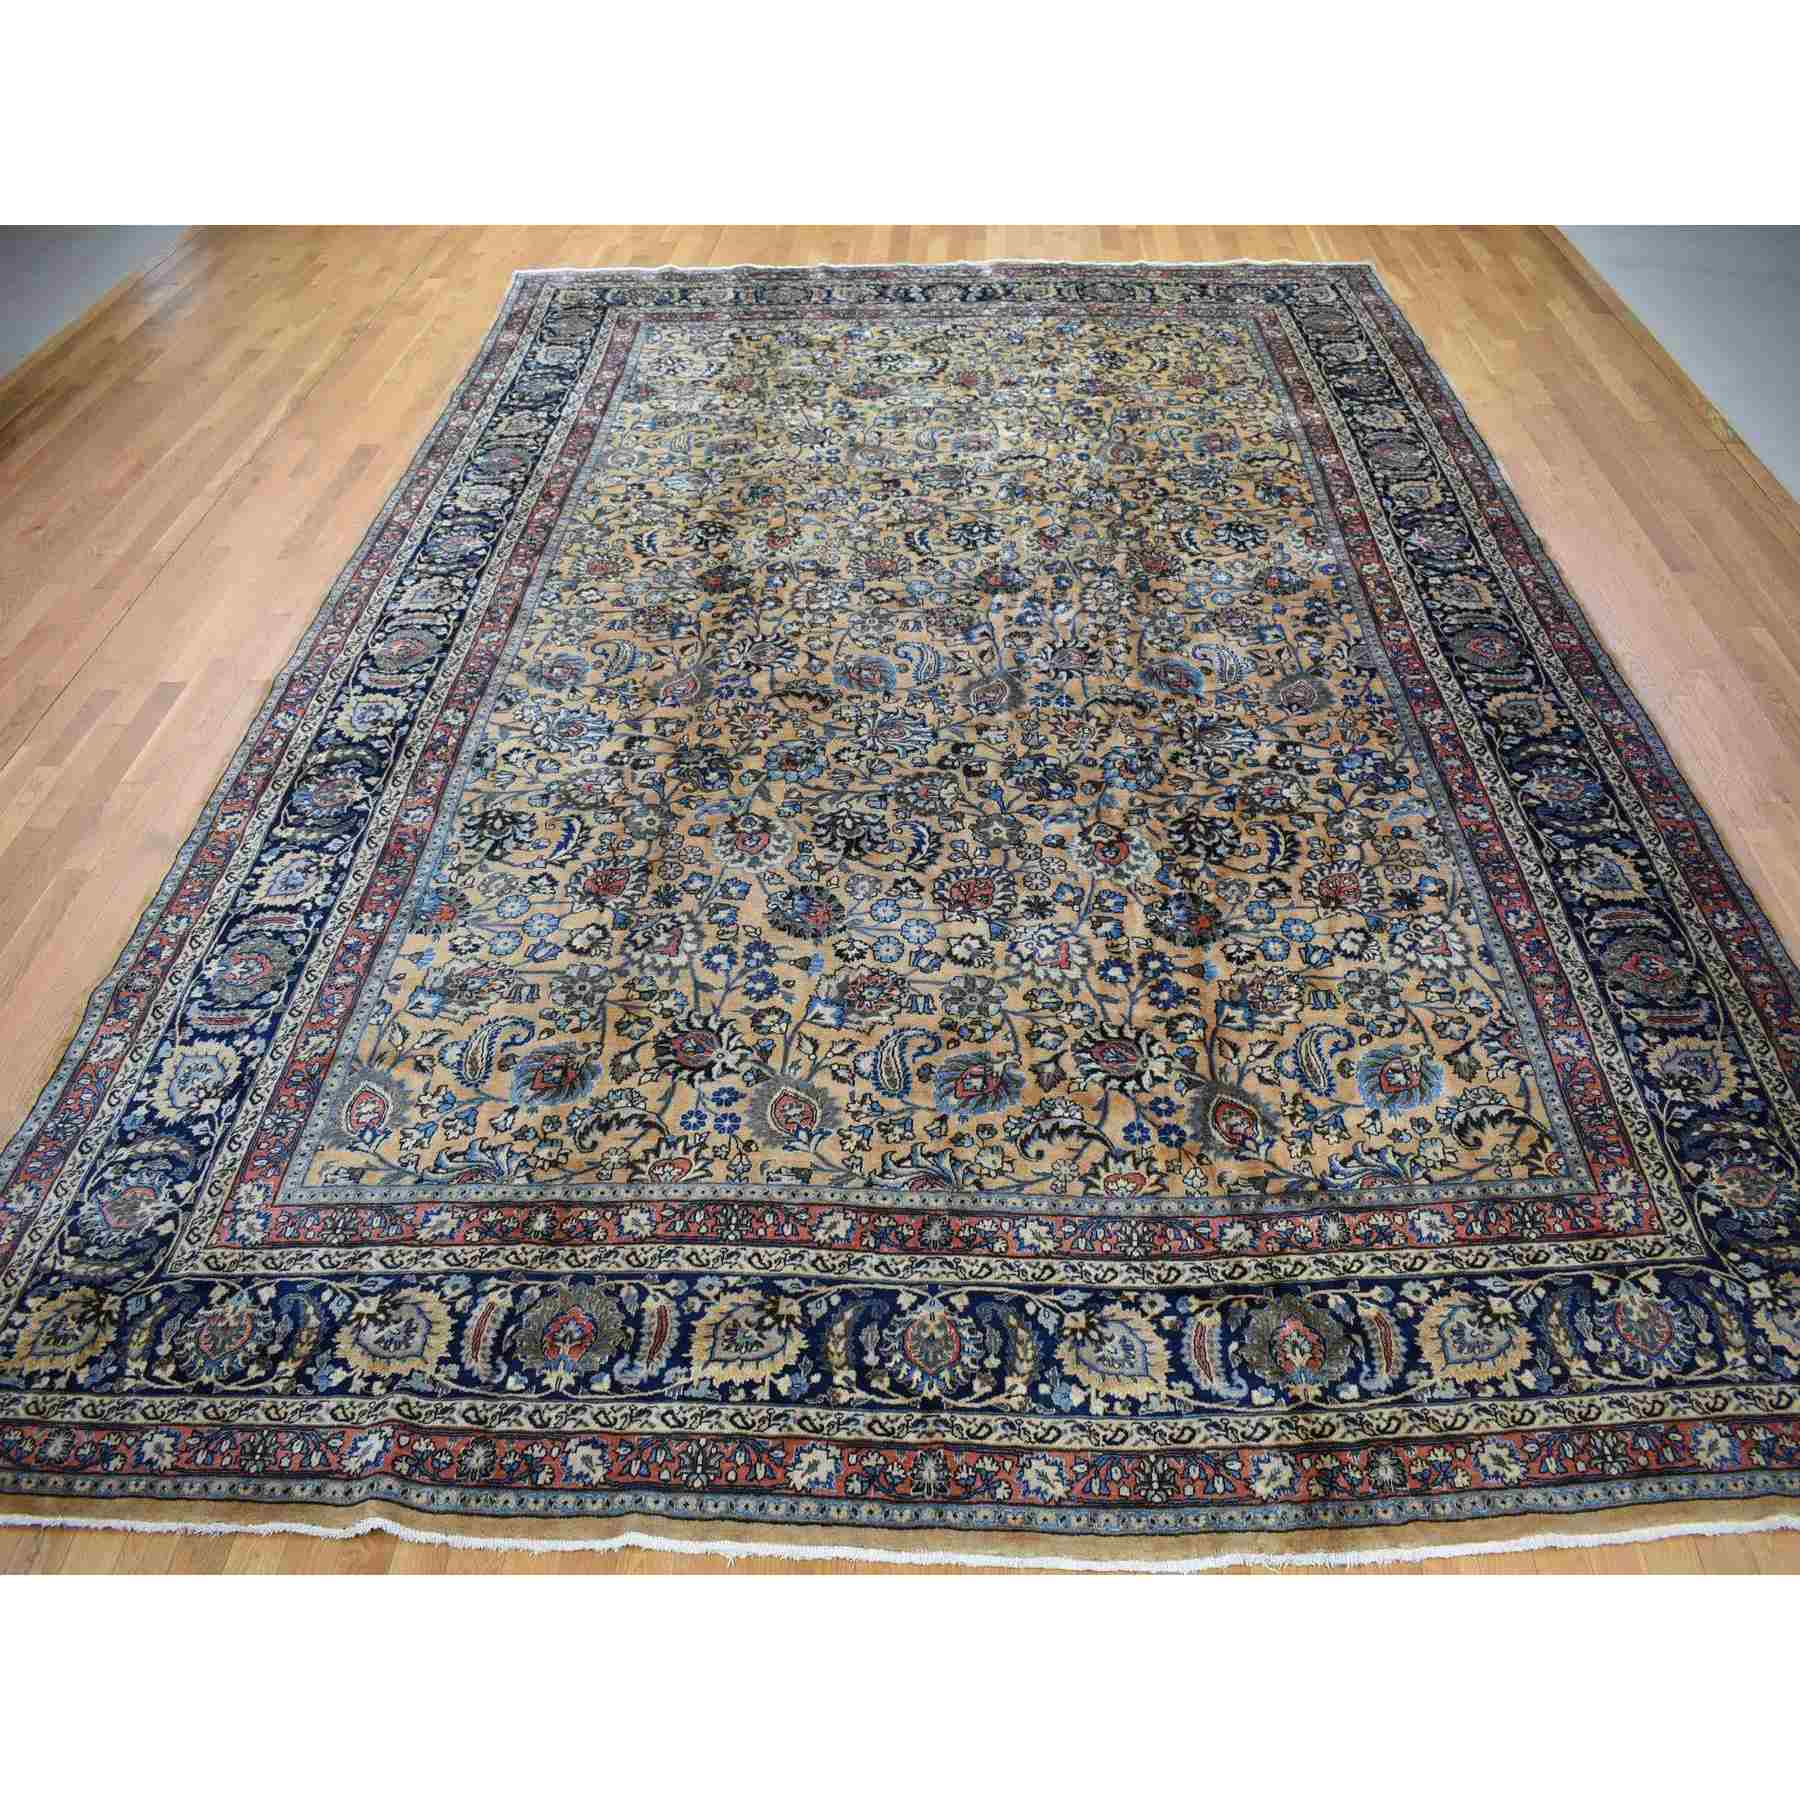 Antique-Hand-Knotted-Rug-400565